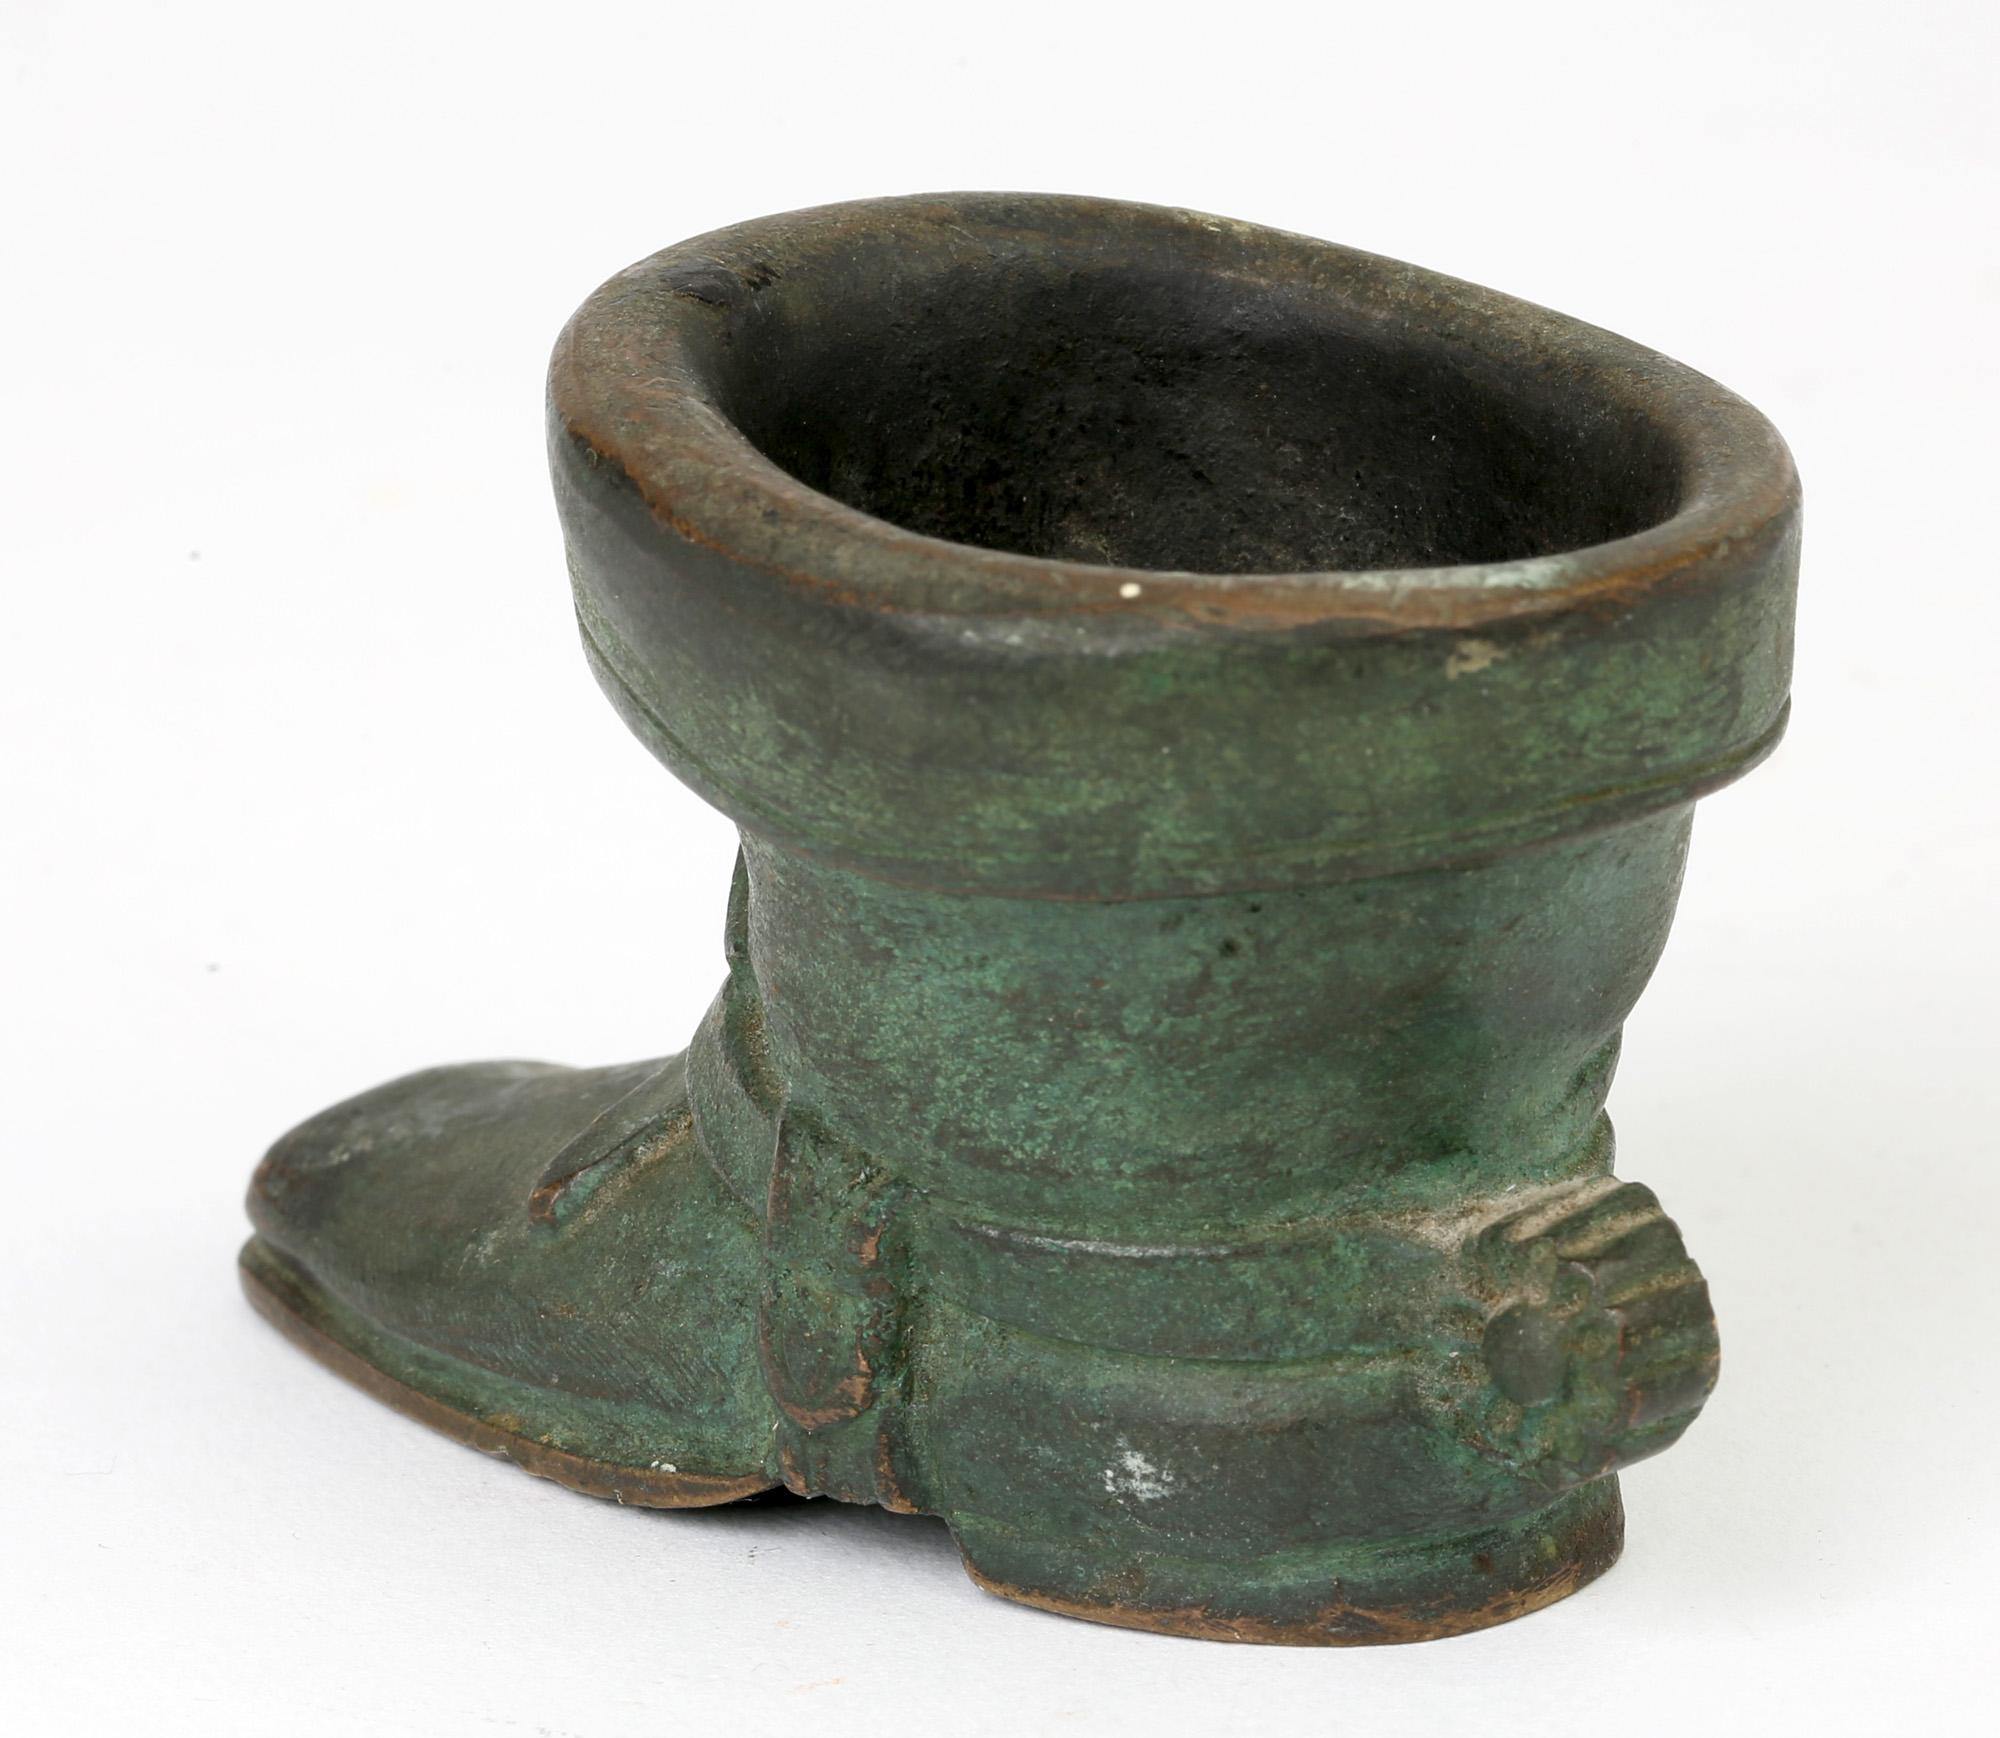 A quality antique Italian Grand Tour bronze boot shaped vesta or match holder dating from 1900. Modeled as a riding boot with a spur strapped to the boot with the body of the boot acting as a container, probably for matches. The boot has a wonderful